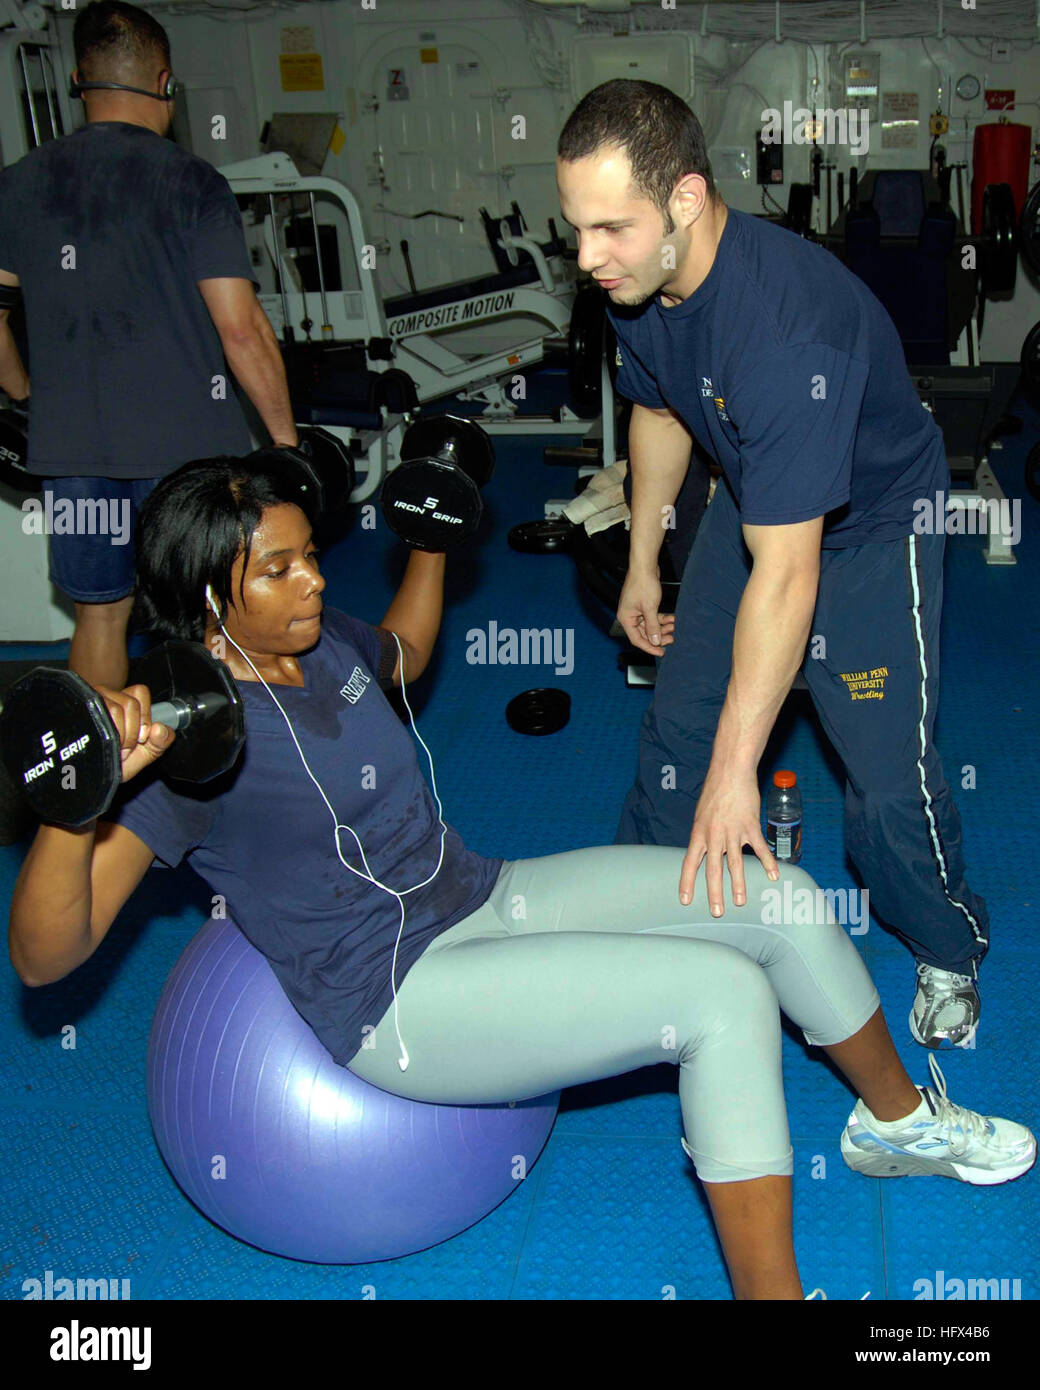 090115-N-9761H-009 PACIFIC OCEAN (Jan. 15, 2009) The ÒFit BossÓ from the amphibious assault ship USS Boxer (LHD 4) stabilizes a Sailor aboard Boxer as she performs weighted sit-ups on an exercise ball. Boxer is on a scheduled deployment in the western Pacific Ocean to provide global maritime security. (U.S. Navy photo by Mass Communication Specialist 2nd Class Jeff Hopkins/Released) Weighted sit-ups on an exercise ball Stock Photo